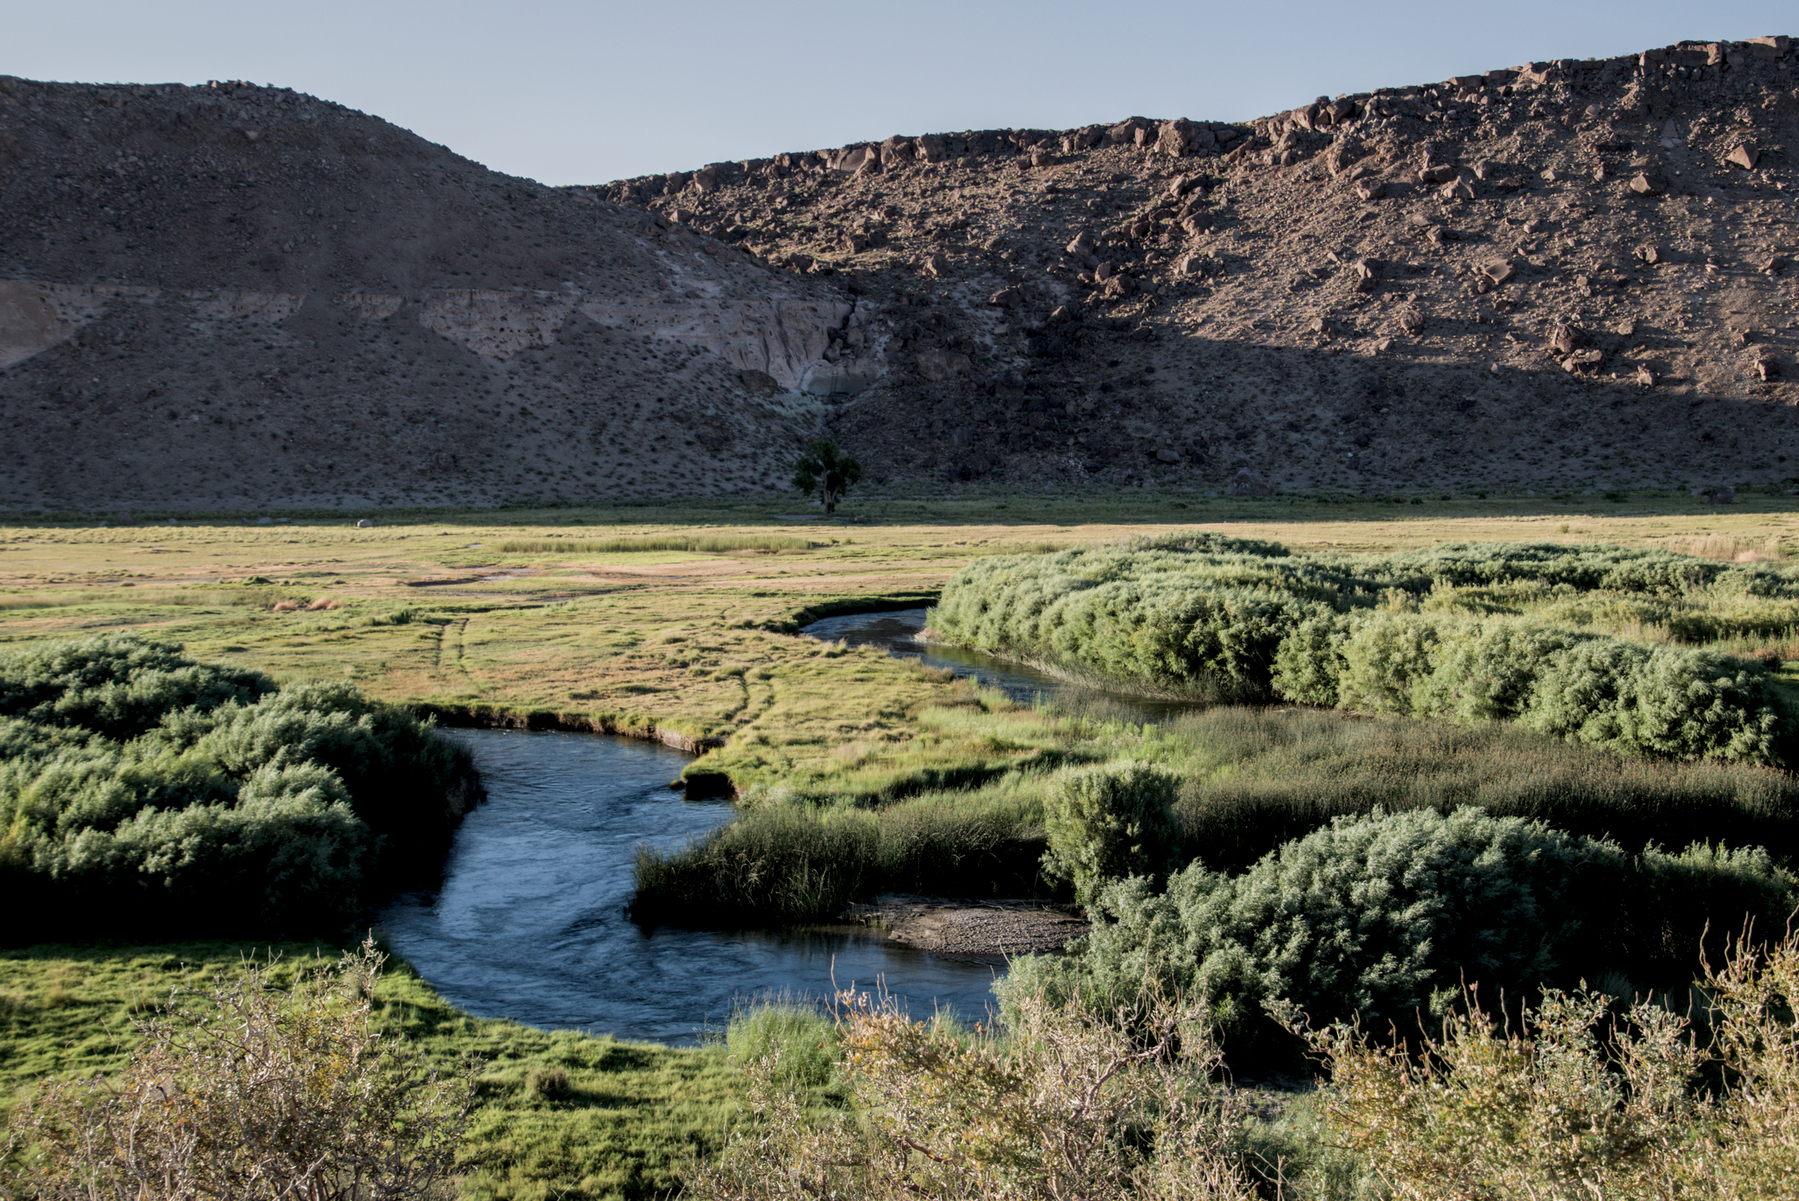 Oxbows of the Owens River, full to the brim, meander through Pleasant Valley. The valley is full of greenery.  A bluff of pink volcanic rock forms the valley wall on the far side.